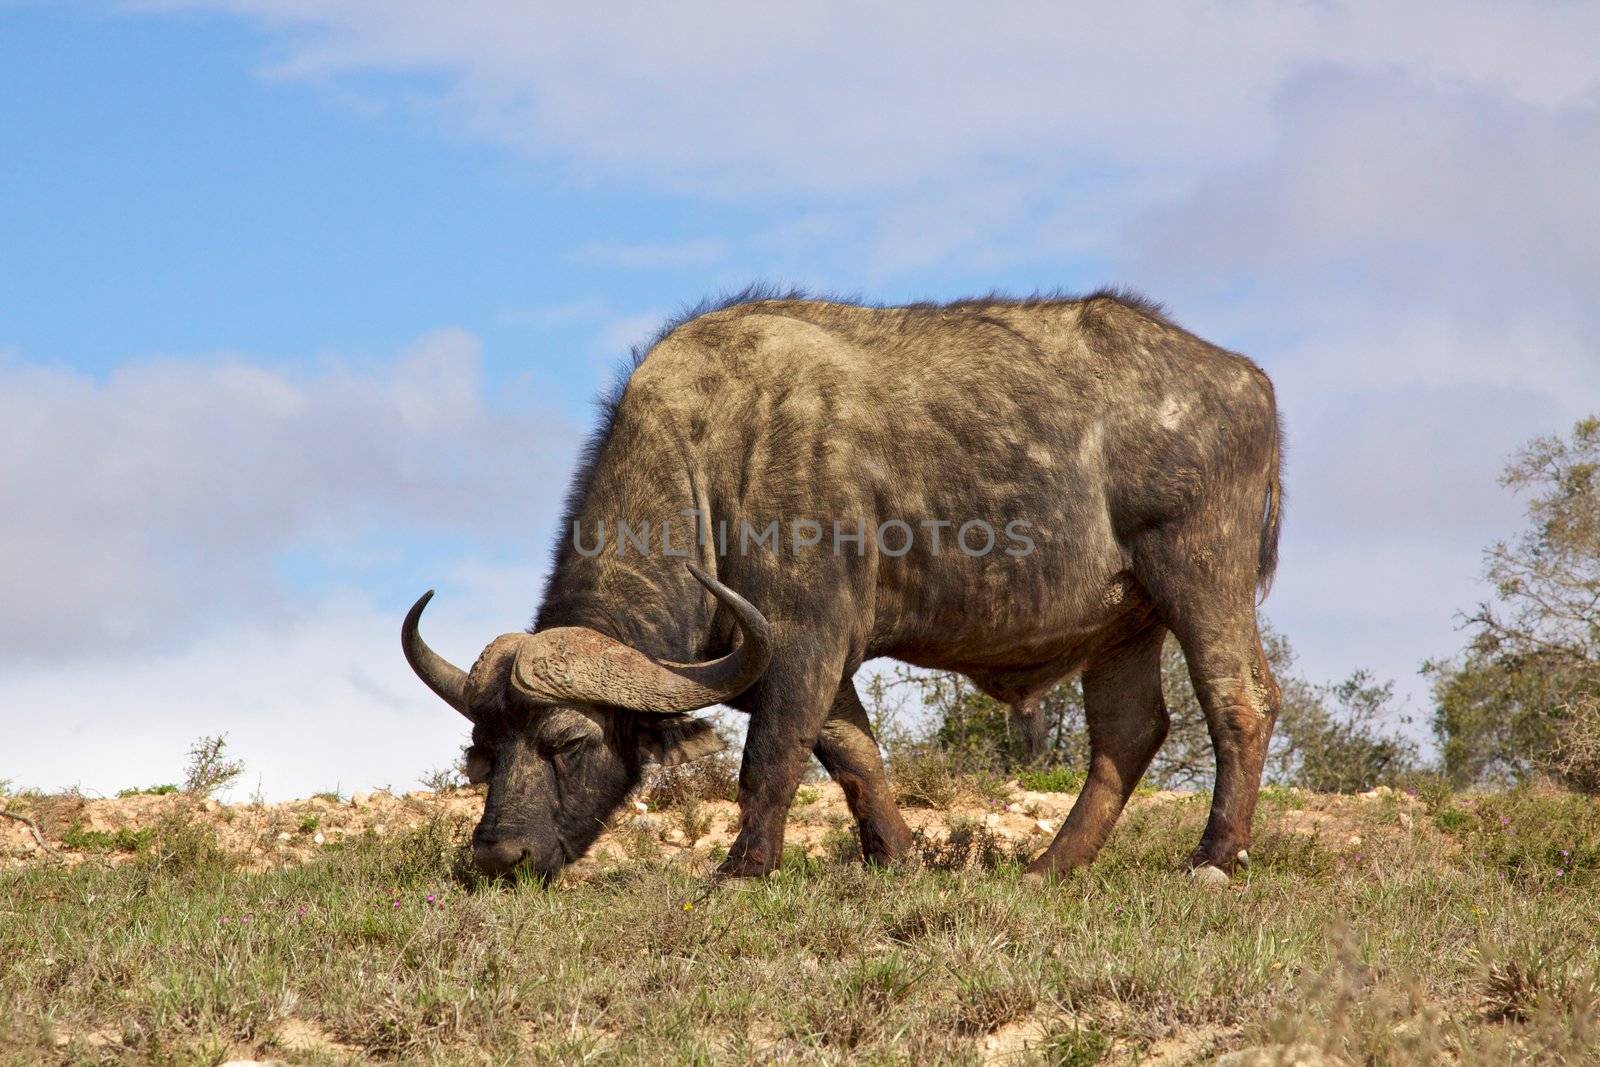 African or Cape buffalo (Syncerus caffer) bull grazing in the Addo Elephant National Park, South Africa.